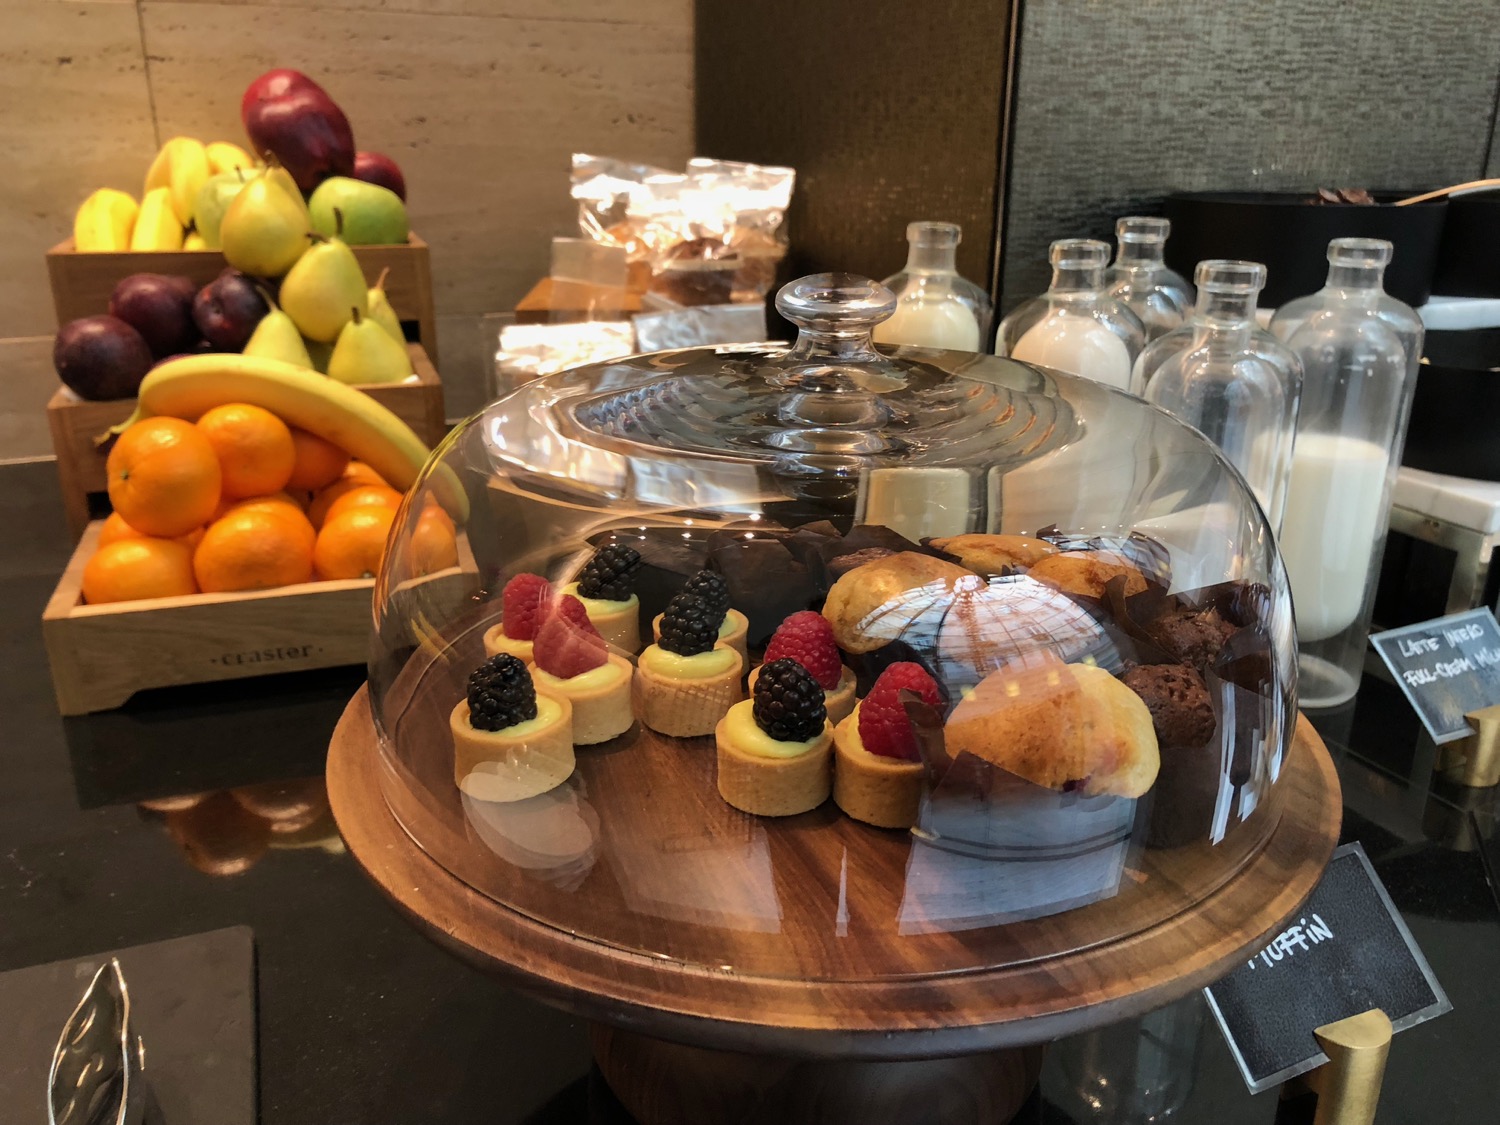 a tray of pastries and fruit on a table